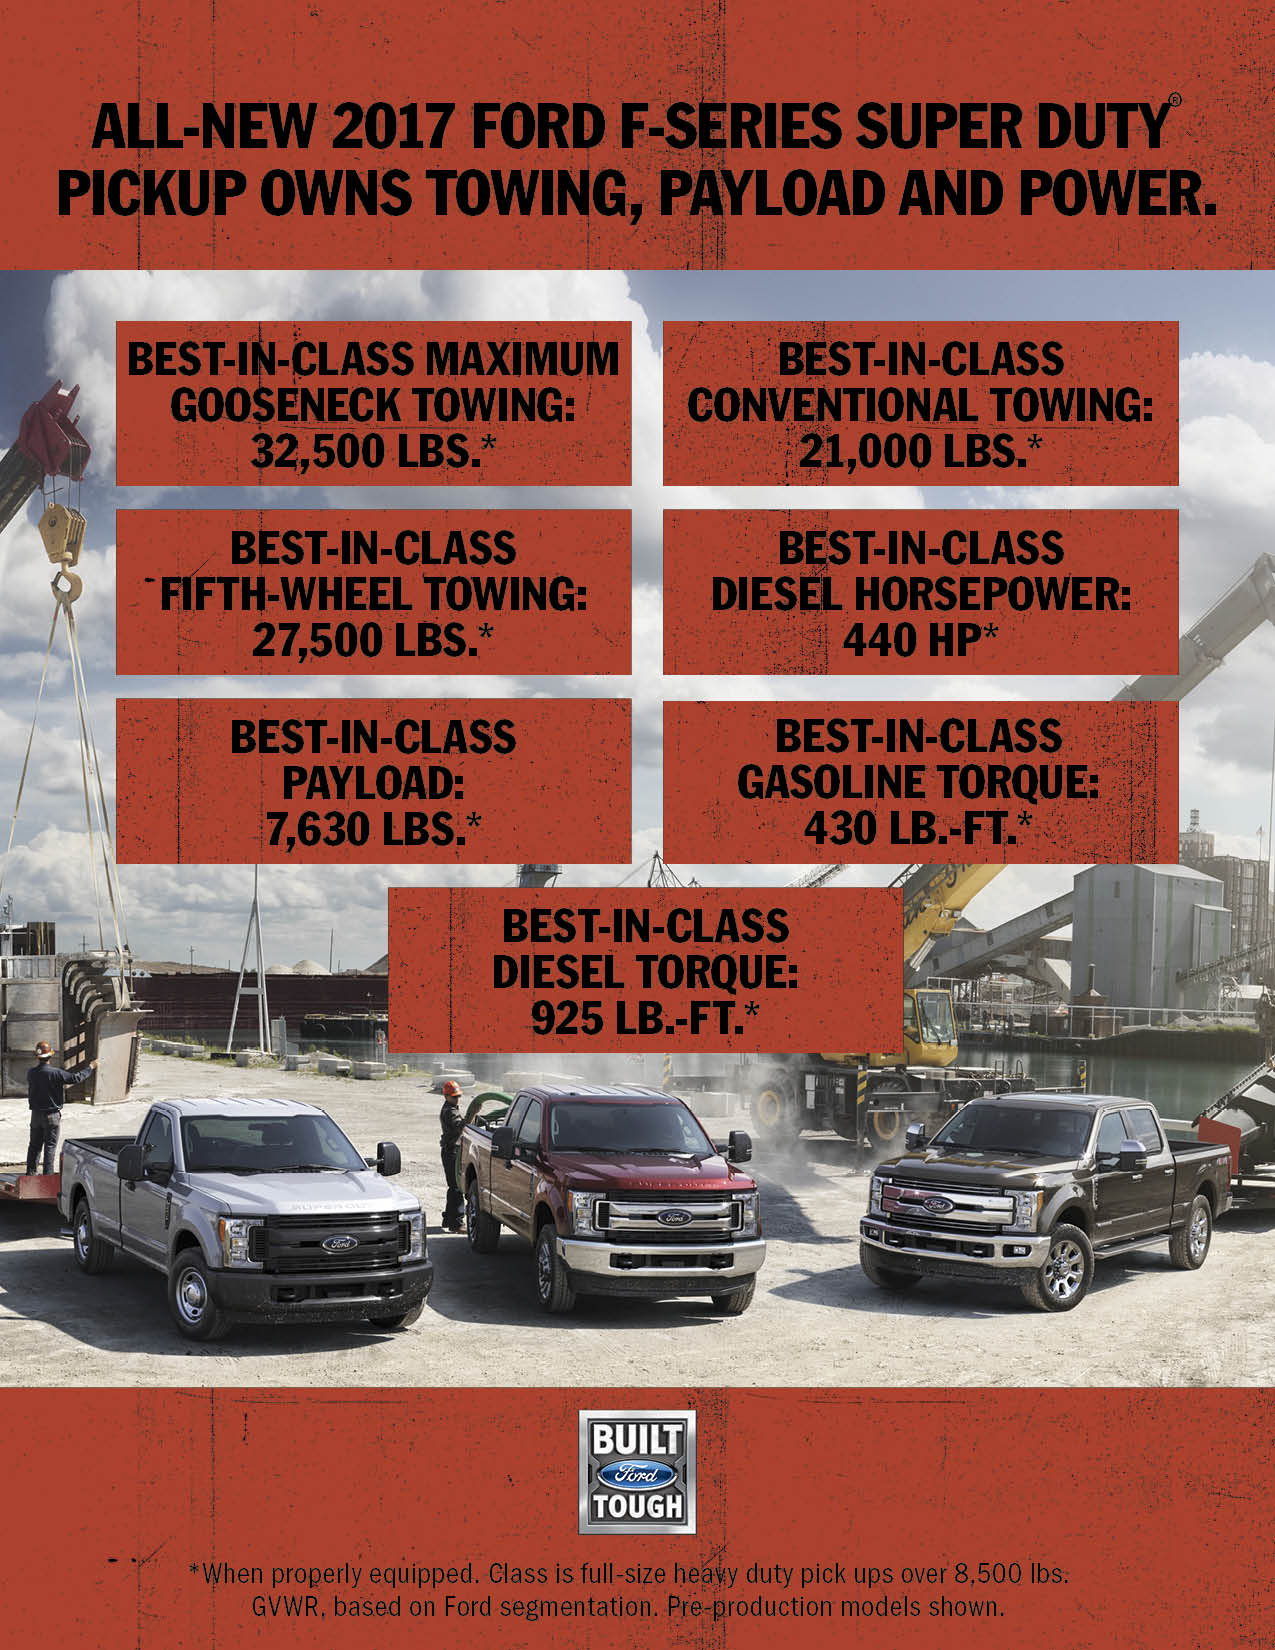 2017 Ford F-Series Super Duty Infographic